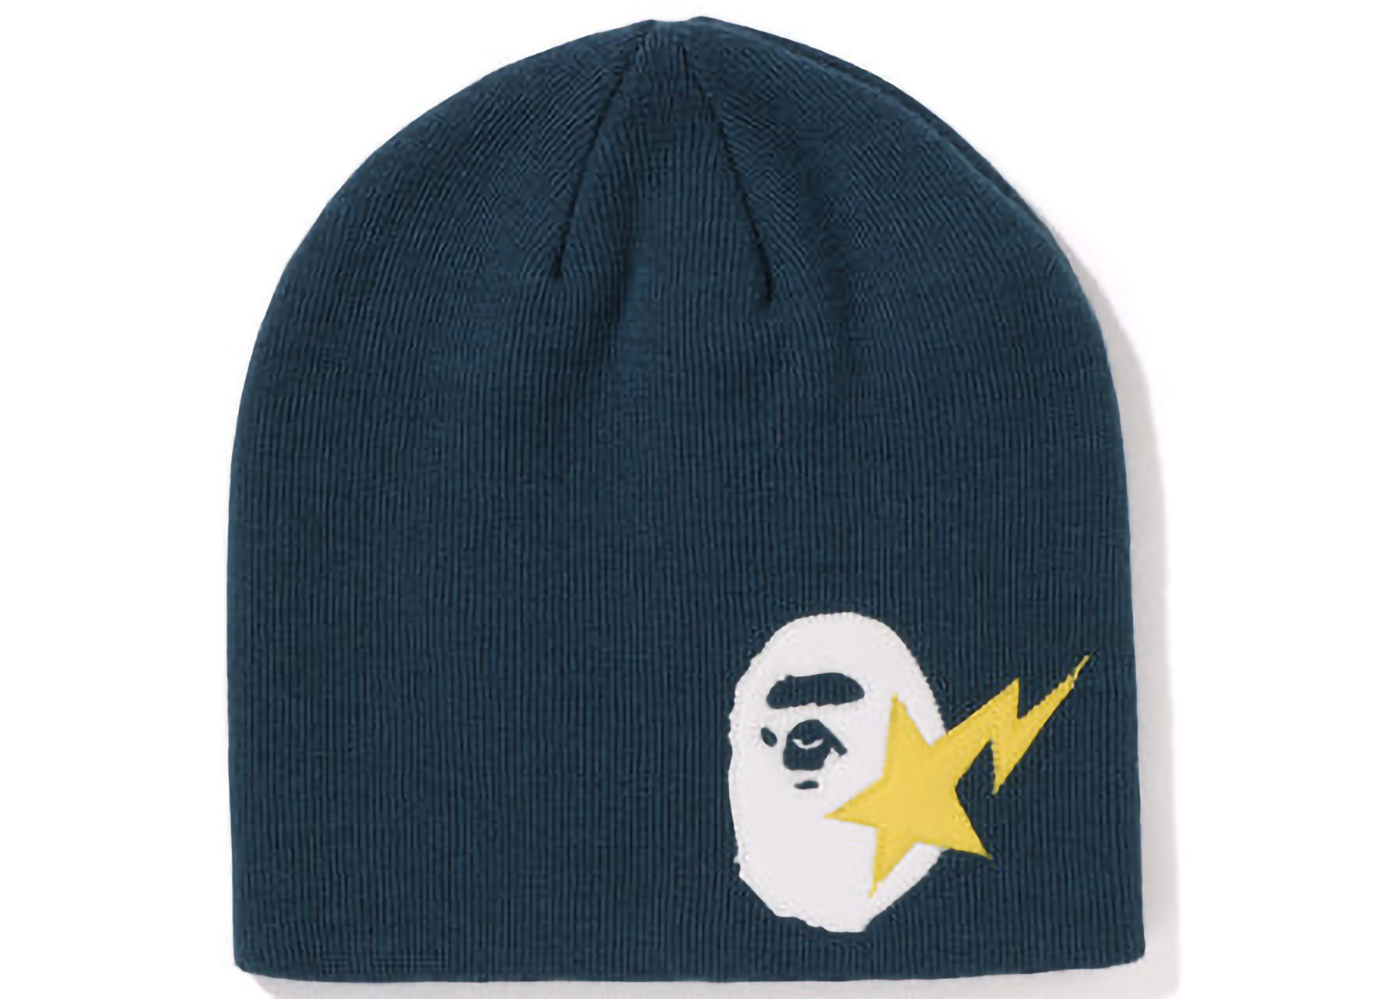 BAPE Sta Ape Head Leather Patched Knit Beanie Navy - FW22 - US